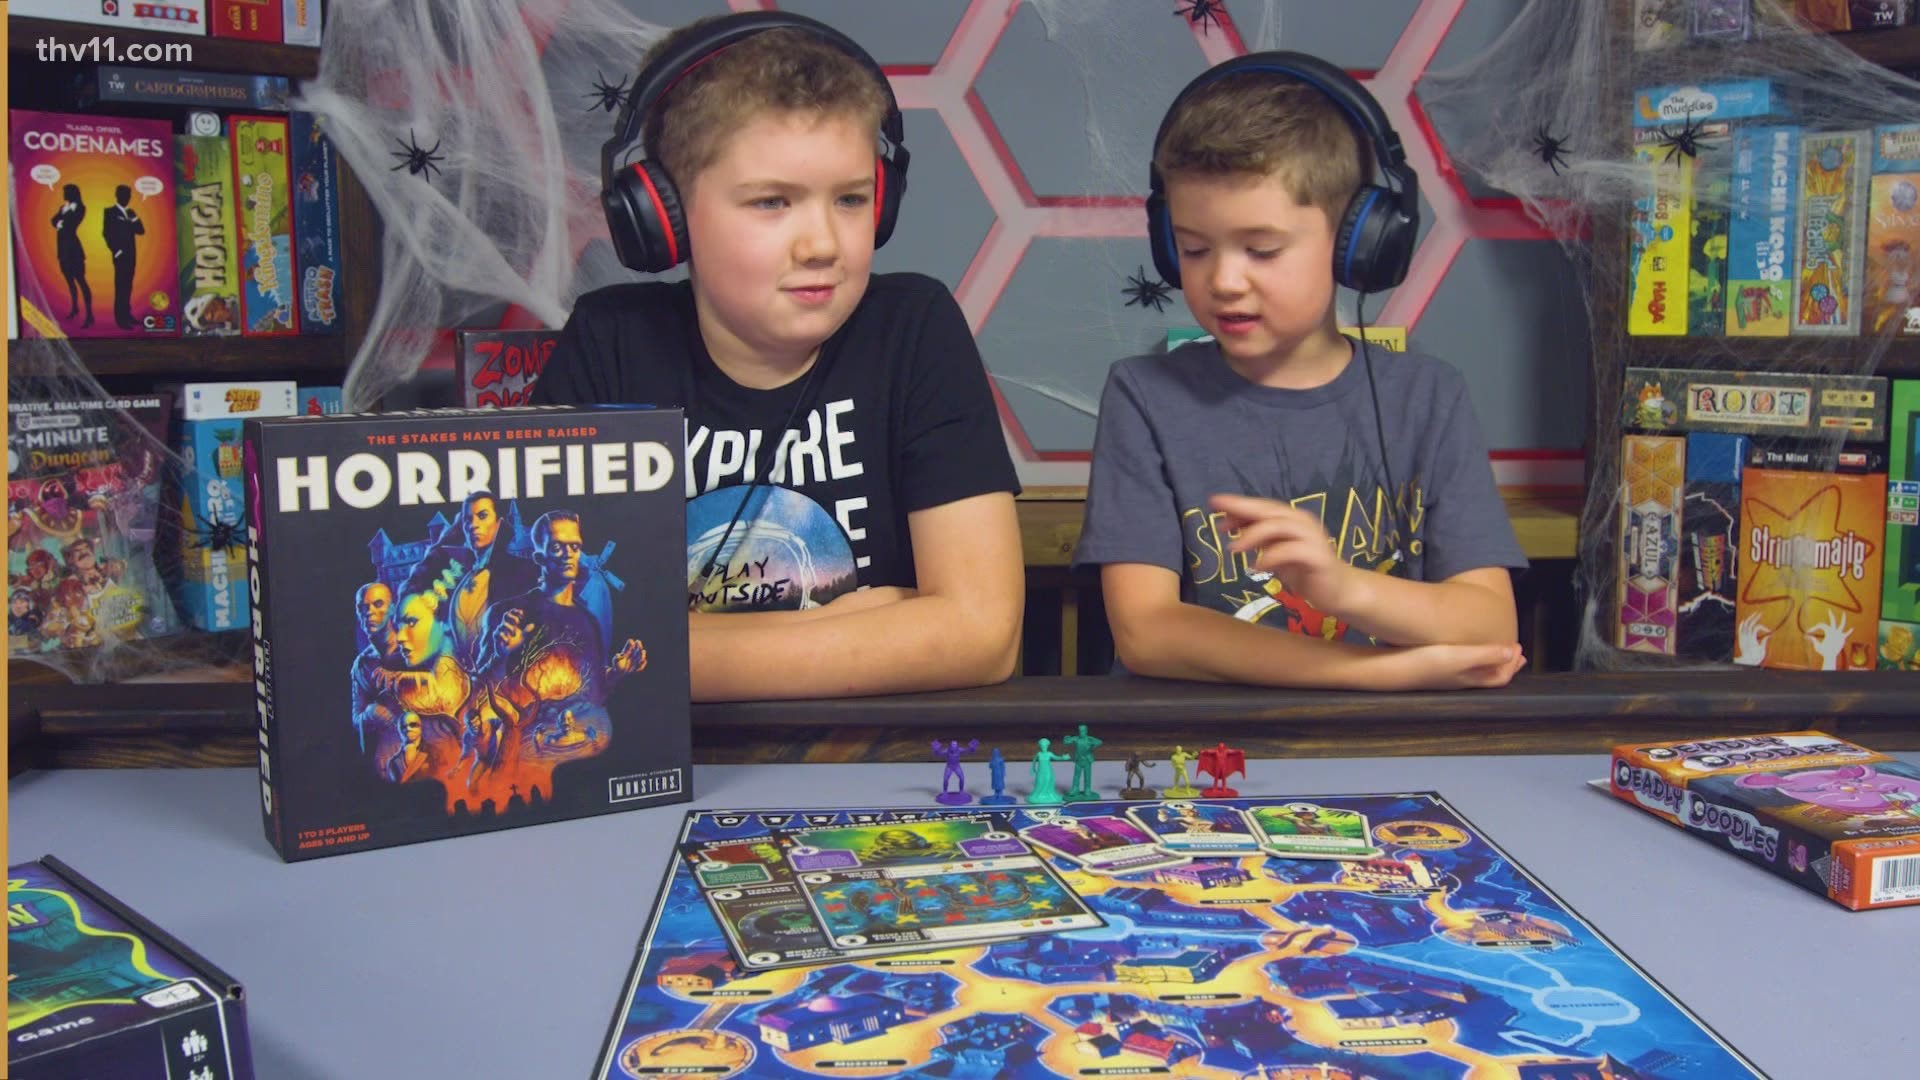 Jarred and Peyton with YouTube channel 'Kidsplaining' talk us through some of their favorite “spooky” board games including Horrified, Deadly Doodles and more.